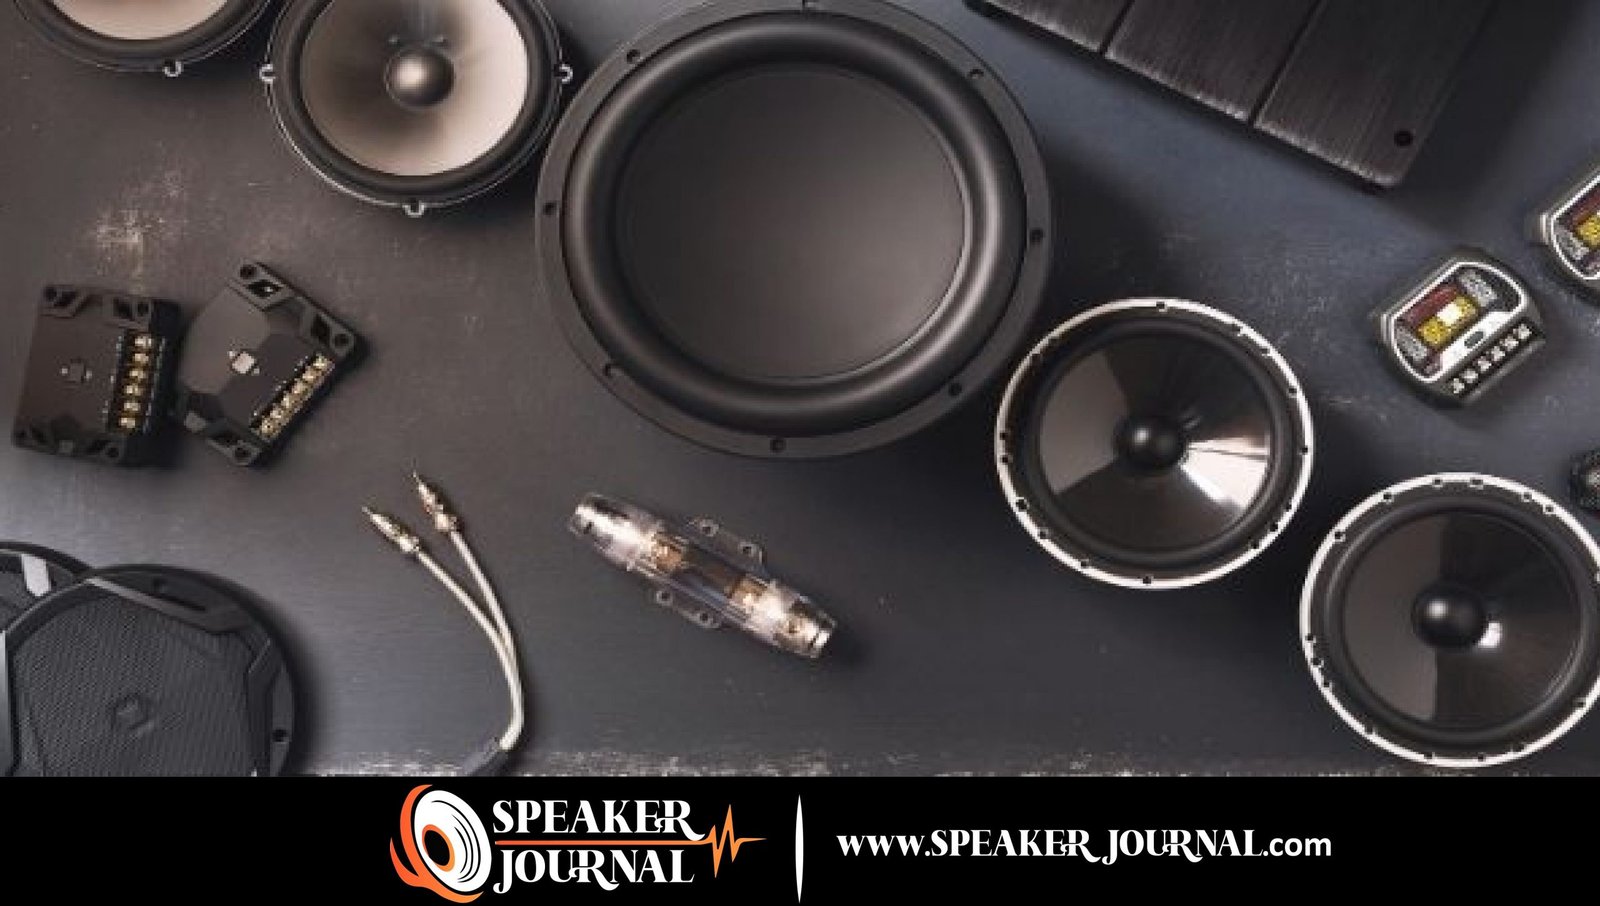 How To Repair A Subwoofer? by speakerjournal.com